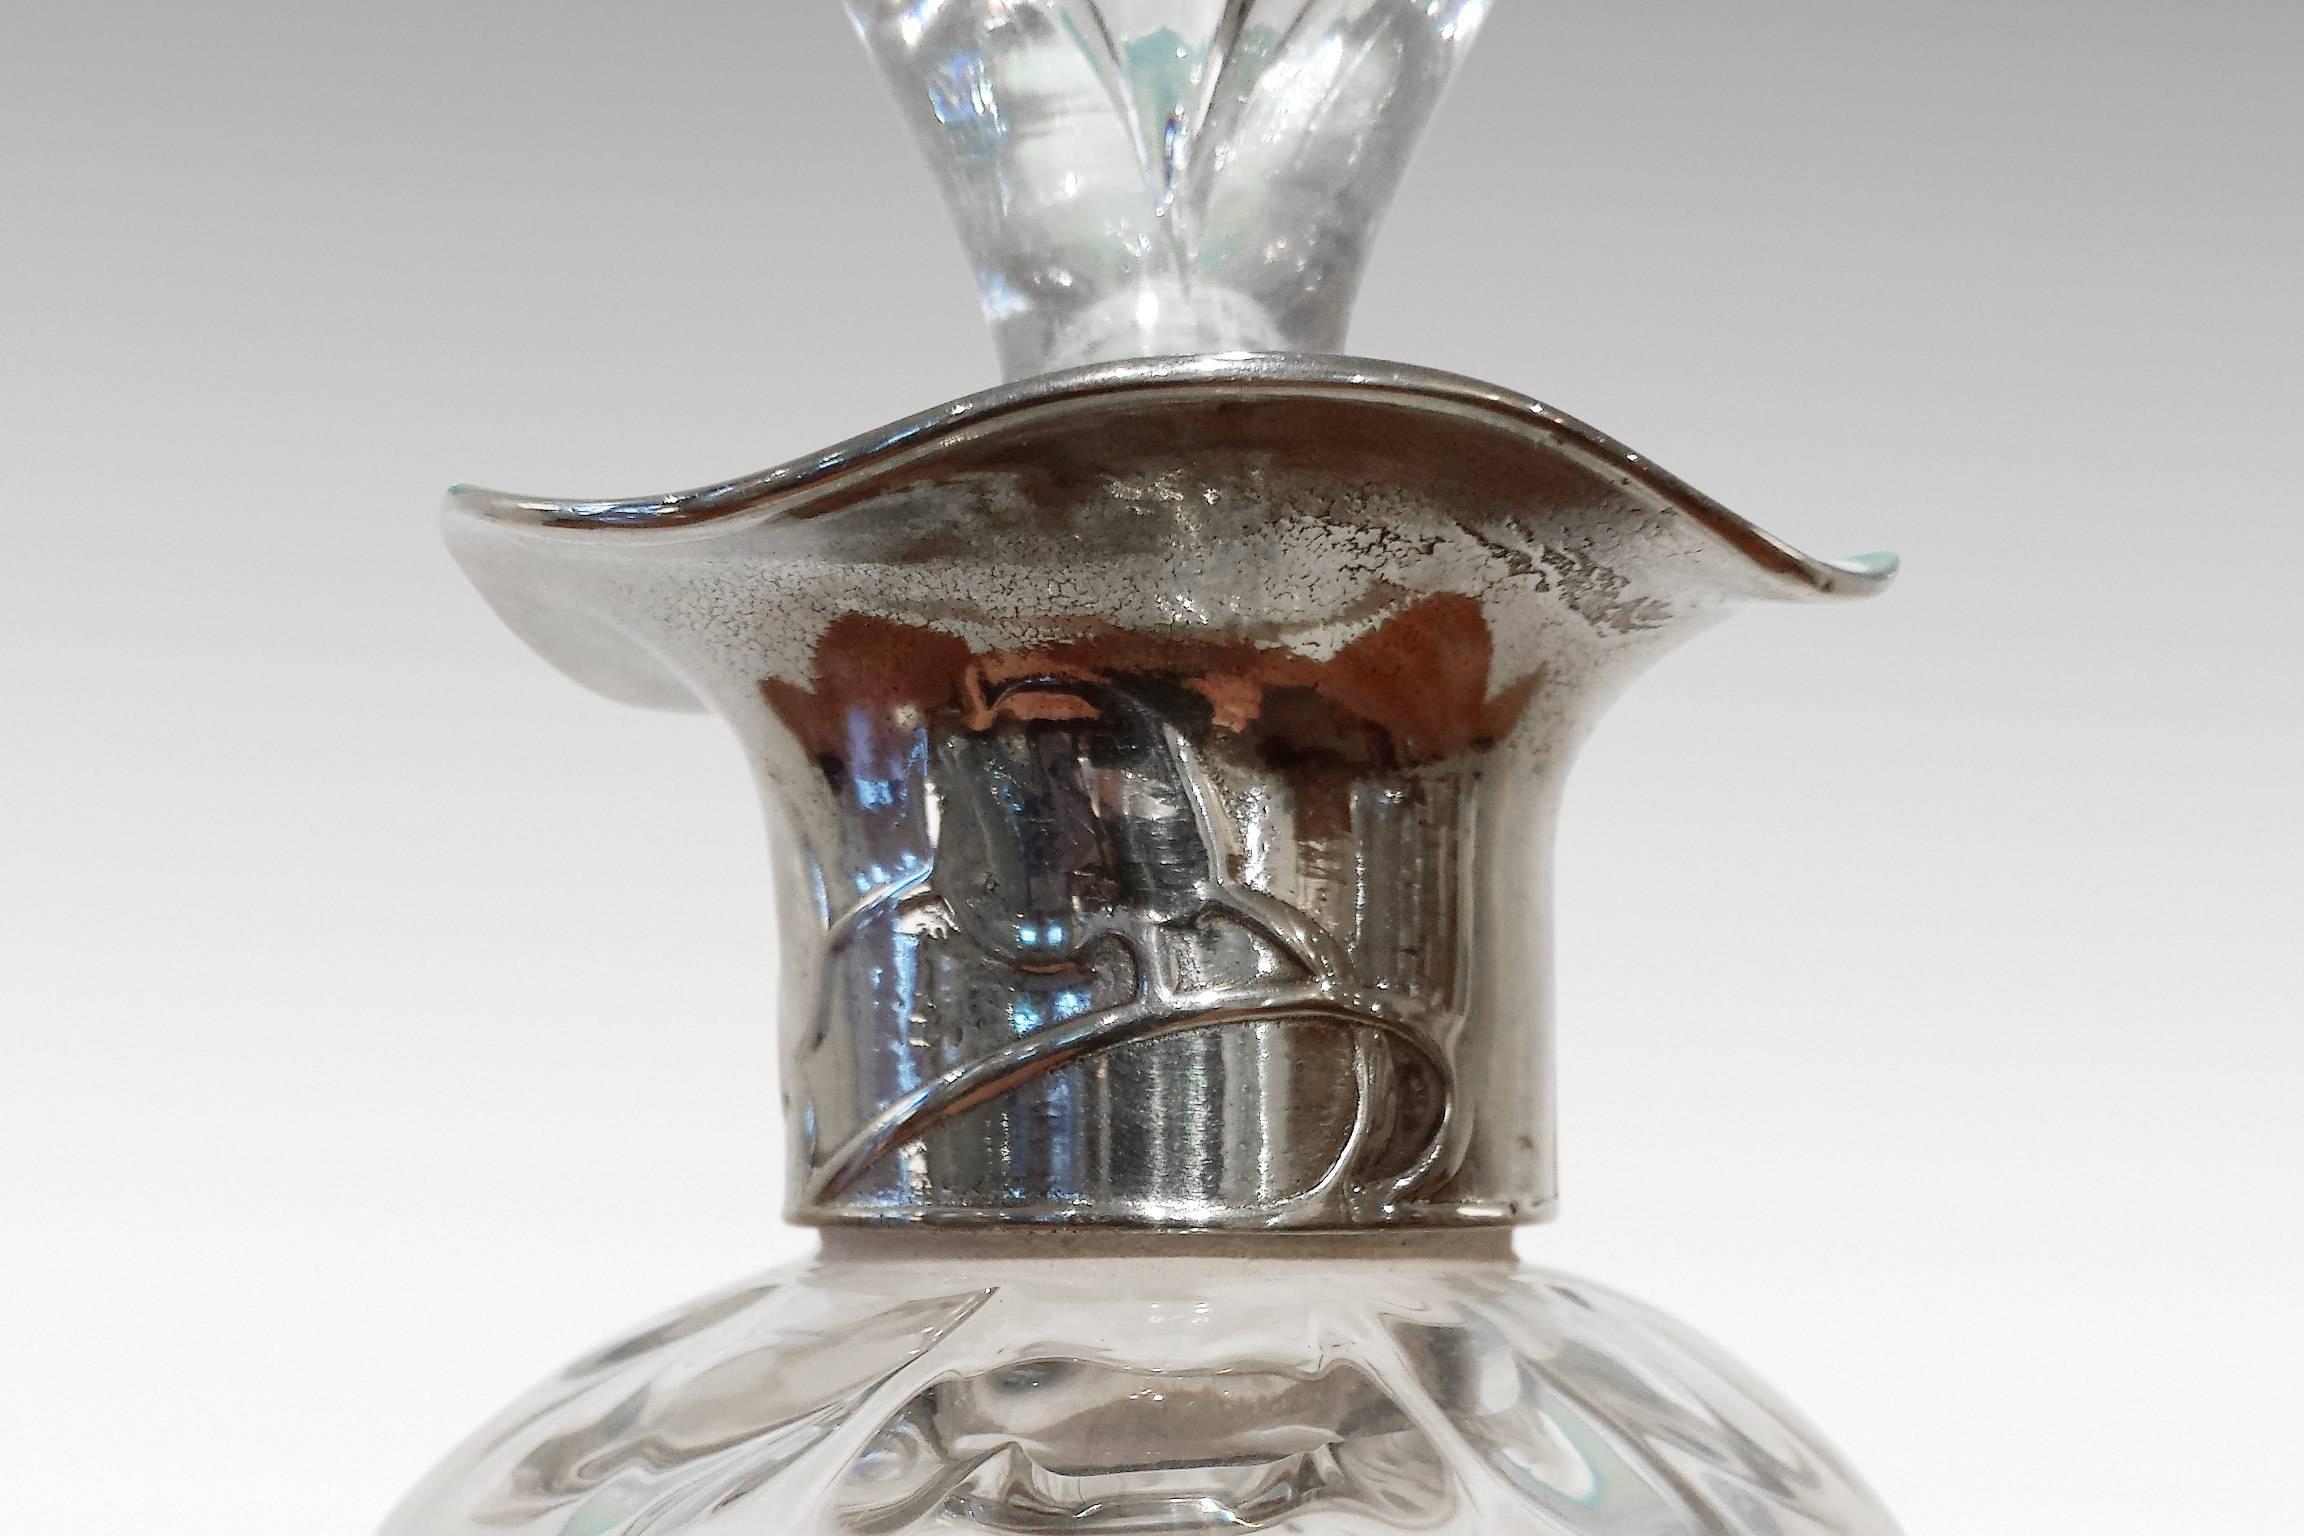 A decanter with Pewter collar incorporating Honesty decoration, designed by Archibald Knox and retailed by Liberty & Co. The glass by James Powell and Sons of Whitefriars.
Literature: Stephen A Martin, 'Archibald Knox' (London, Artmedia: 2001), p